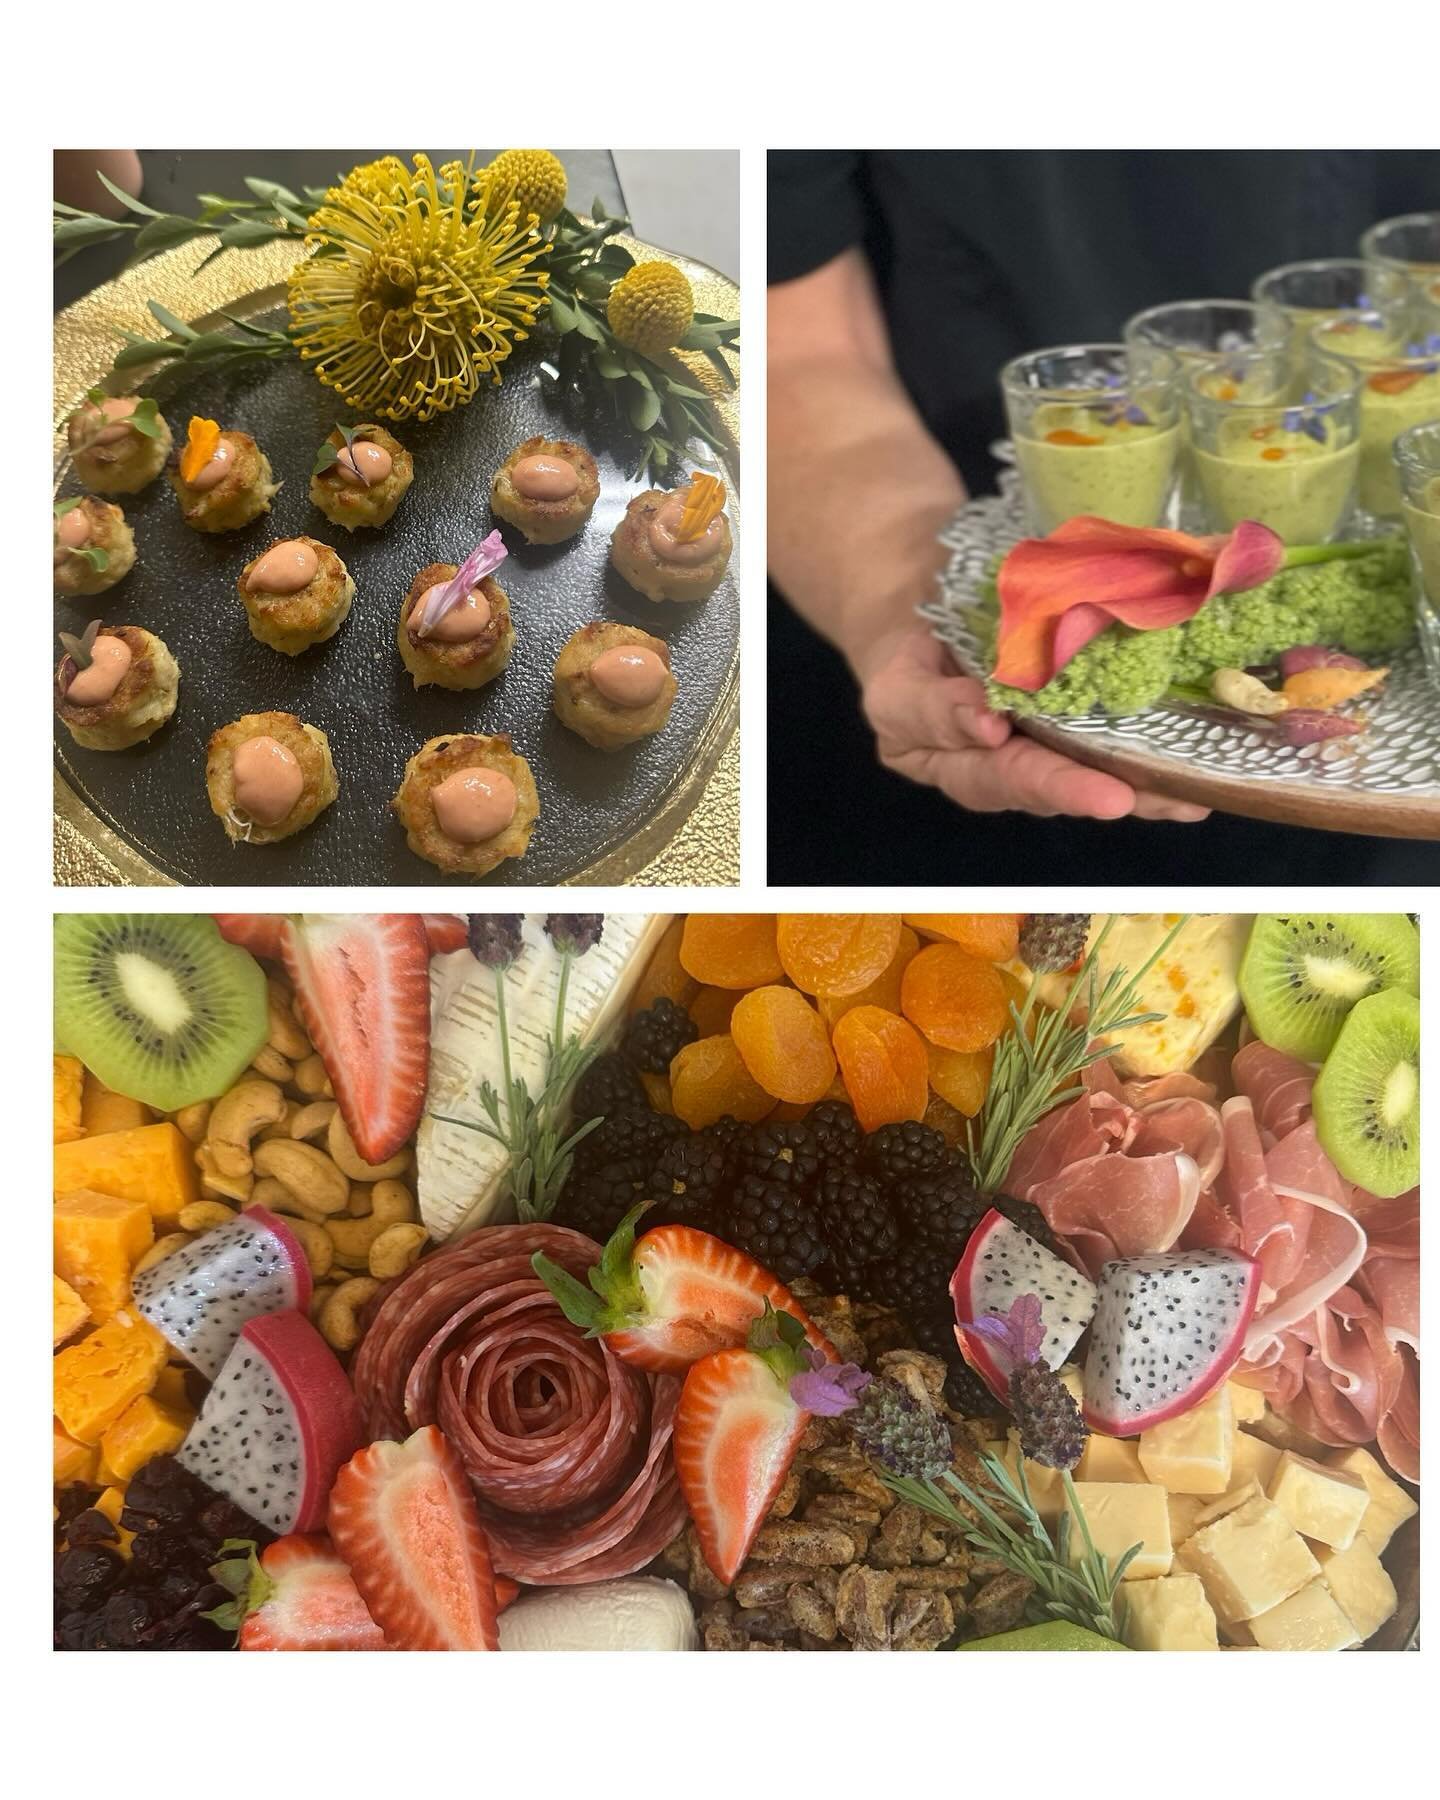 We recently catered an event for the garden tour at a private home at the Northend in Virginia Beach. It was a gorgeous (and delicious) affair! 🌸🍓🥬

#757catering #757caterer #virginiabeachcatering #757smallbusiness #757foodie